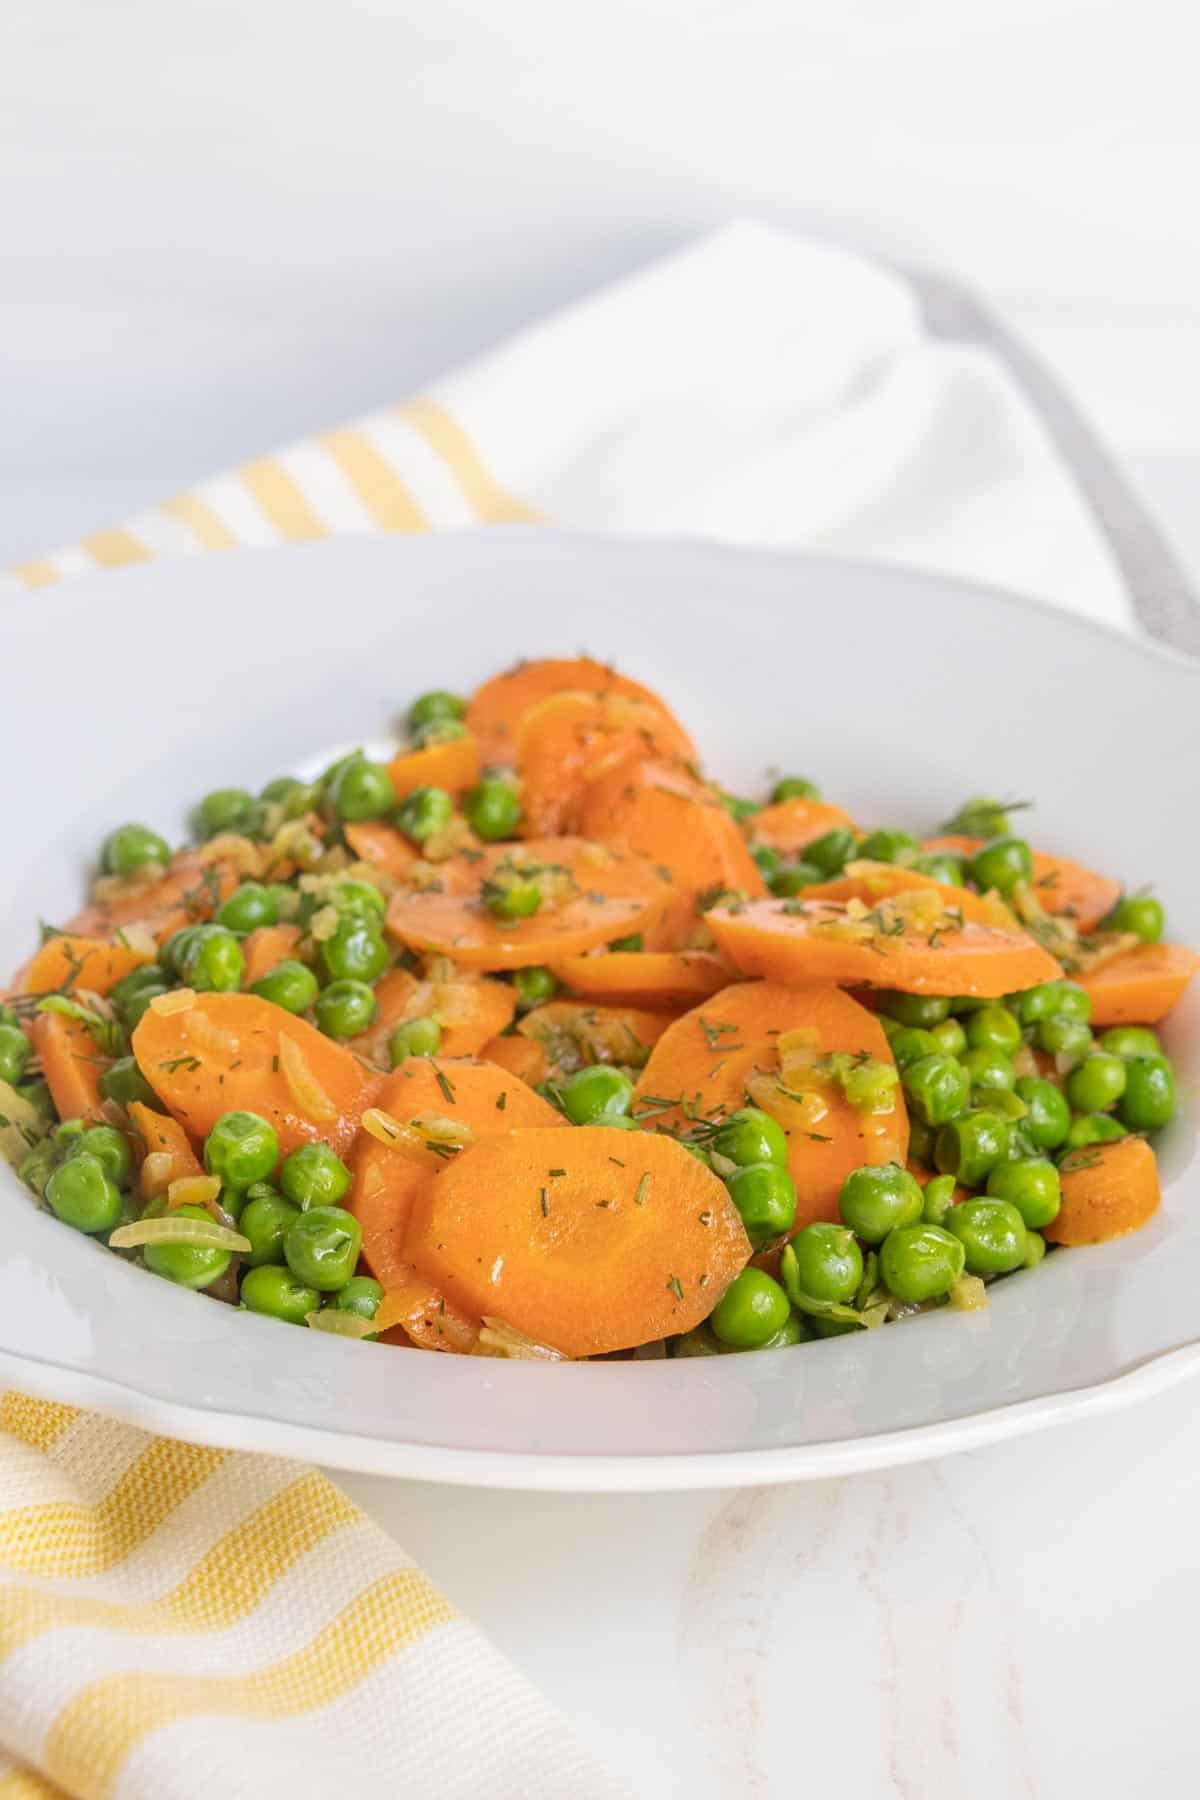 A plate of sliced carrots and green peas garnished with herbs.